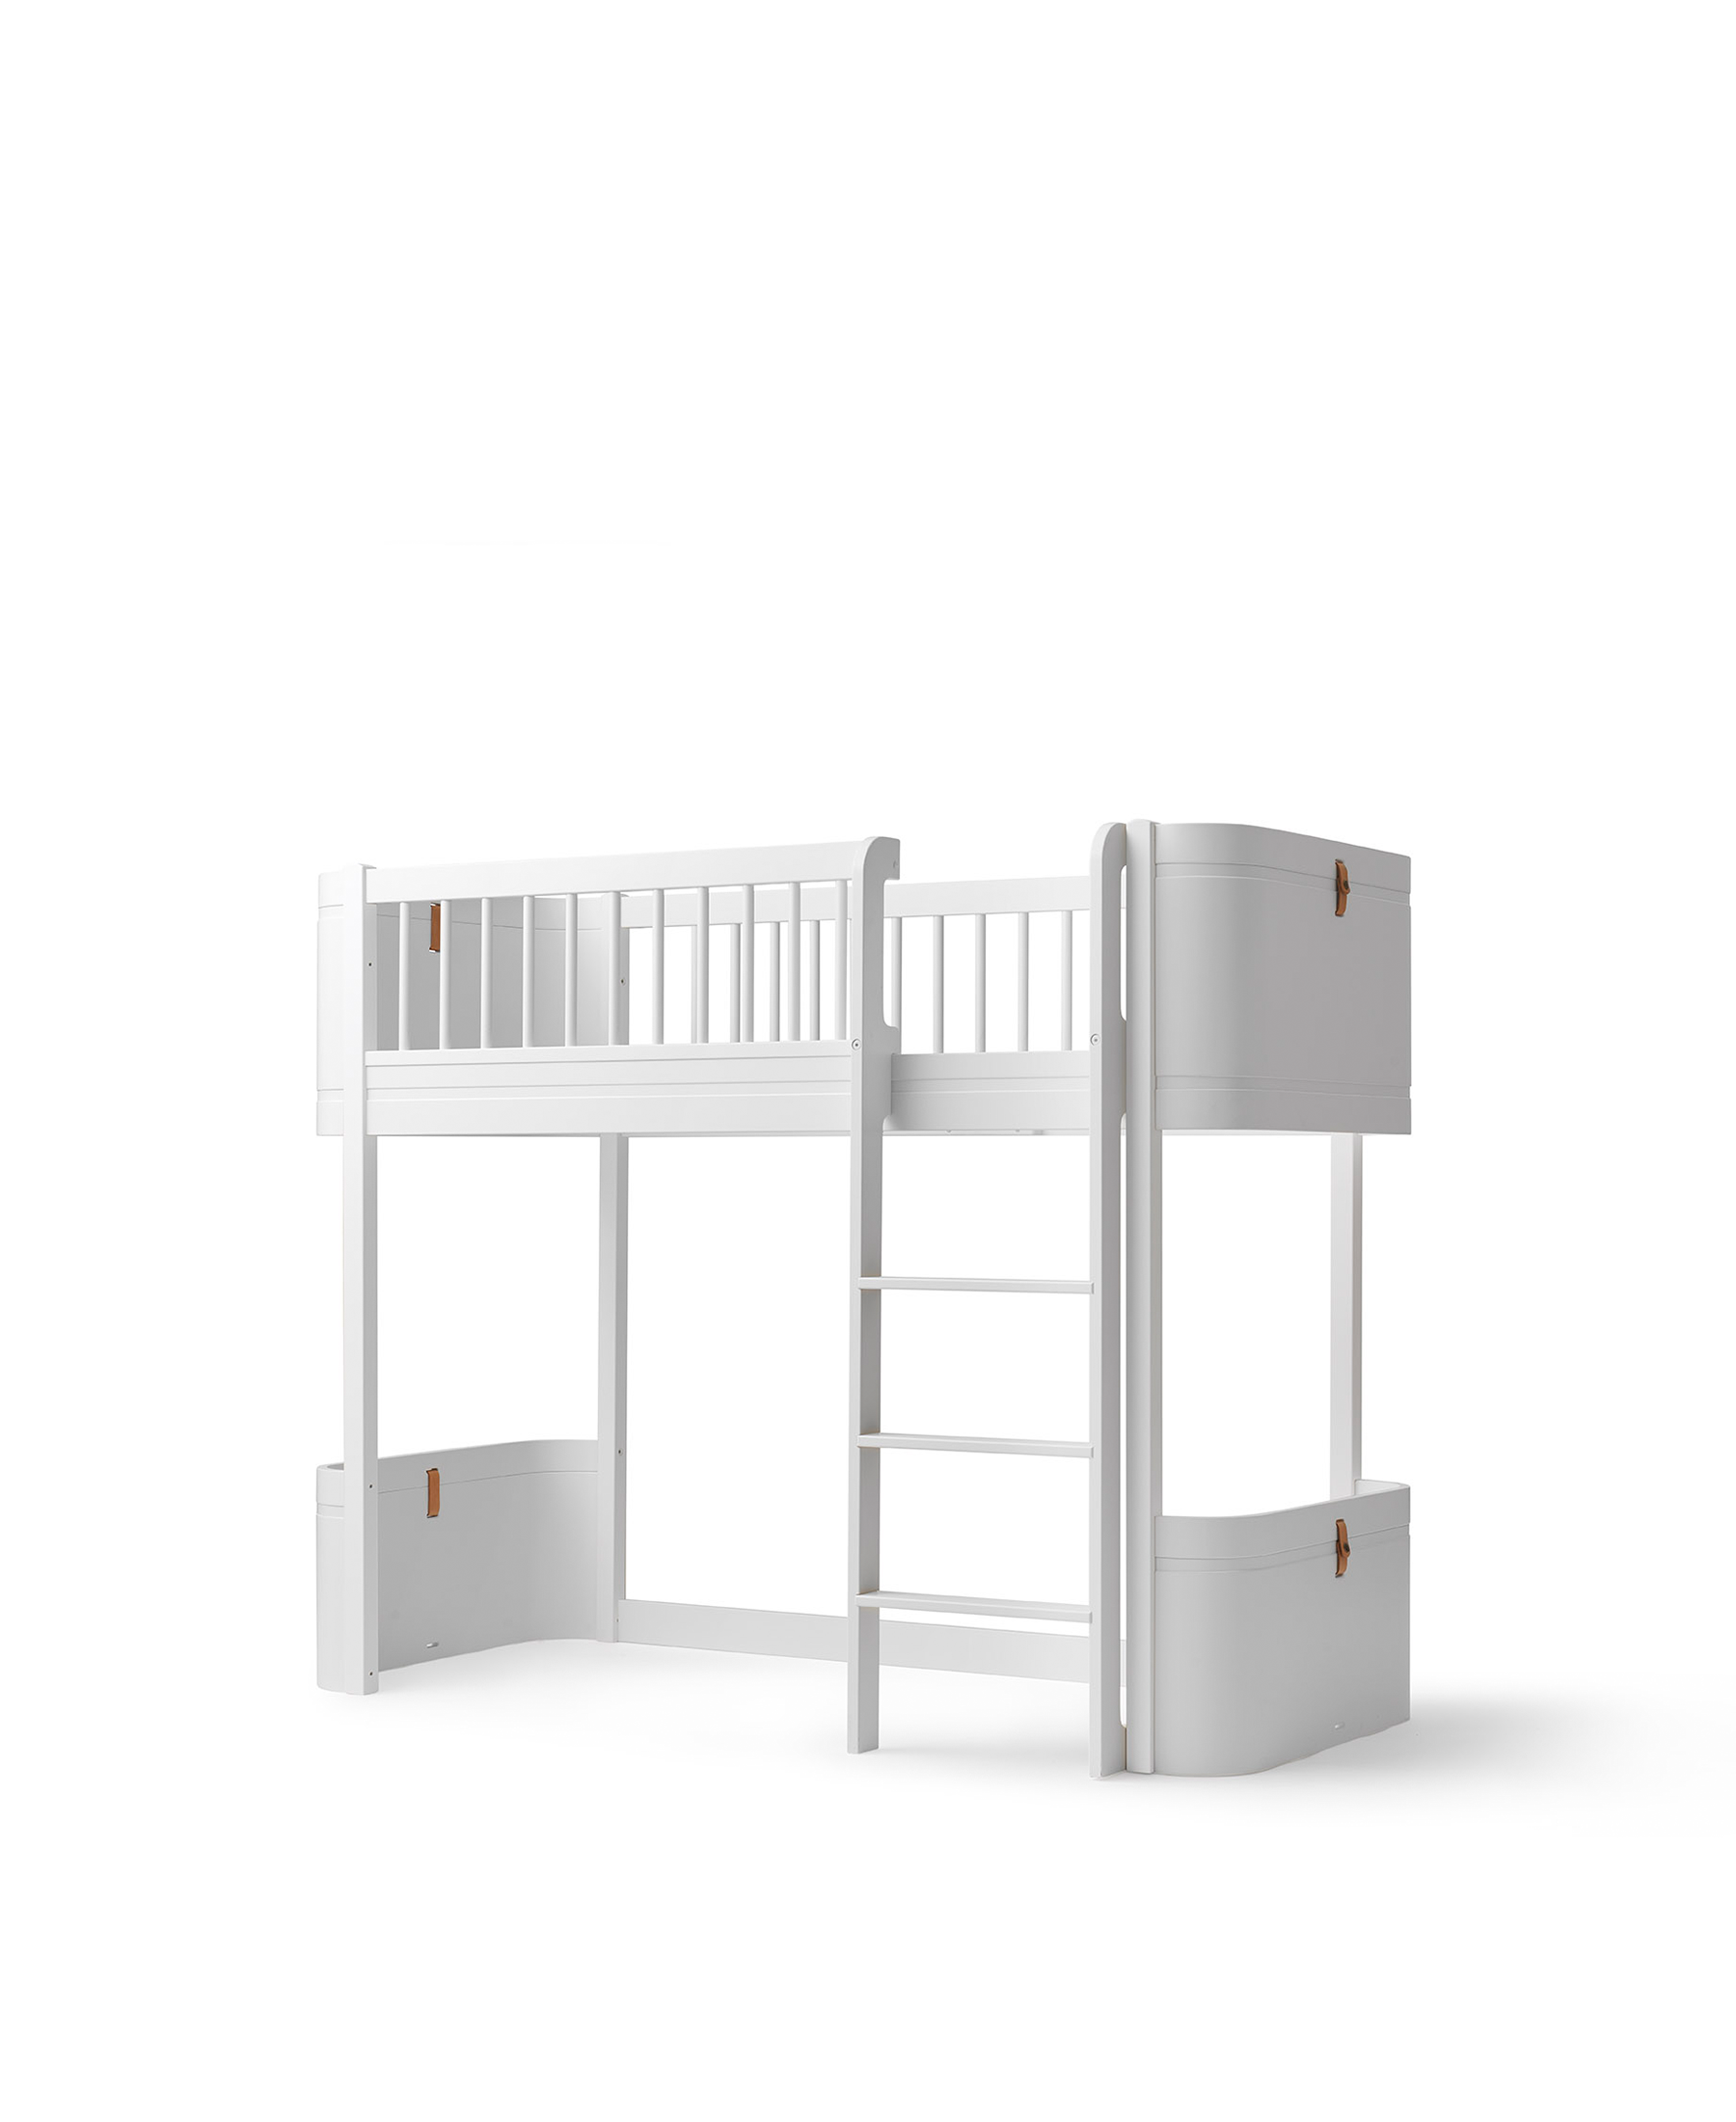 Conversion of Mini + cot bed in all white to Mini+ low loft bed in all white -by Oliver Furniture